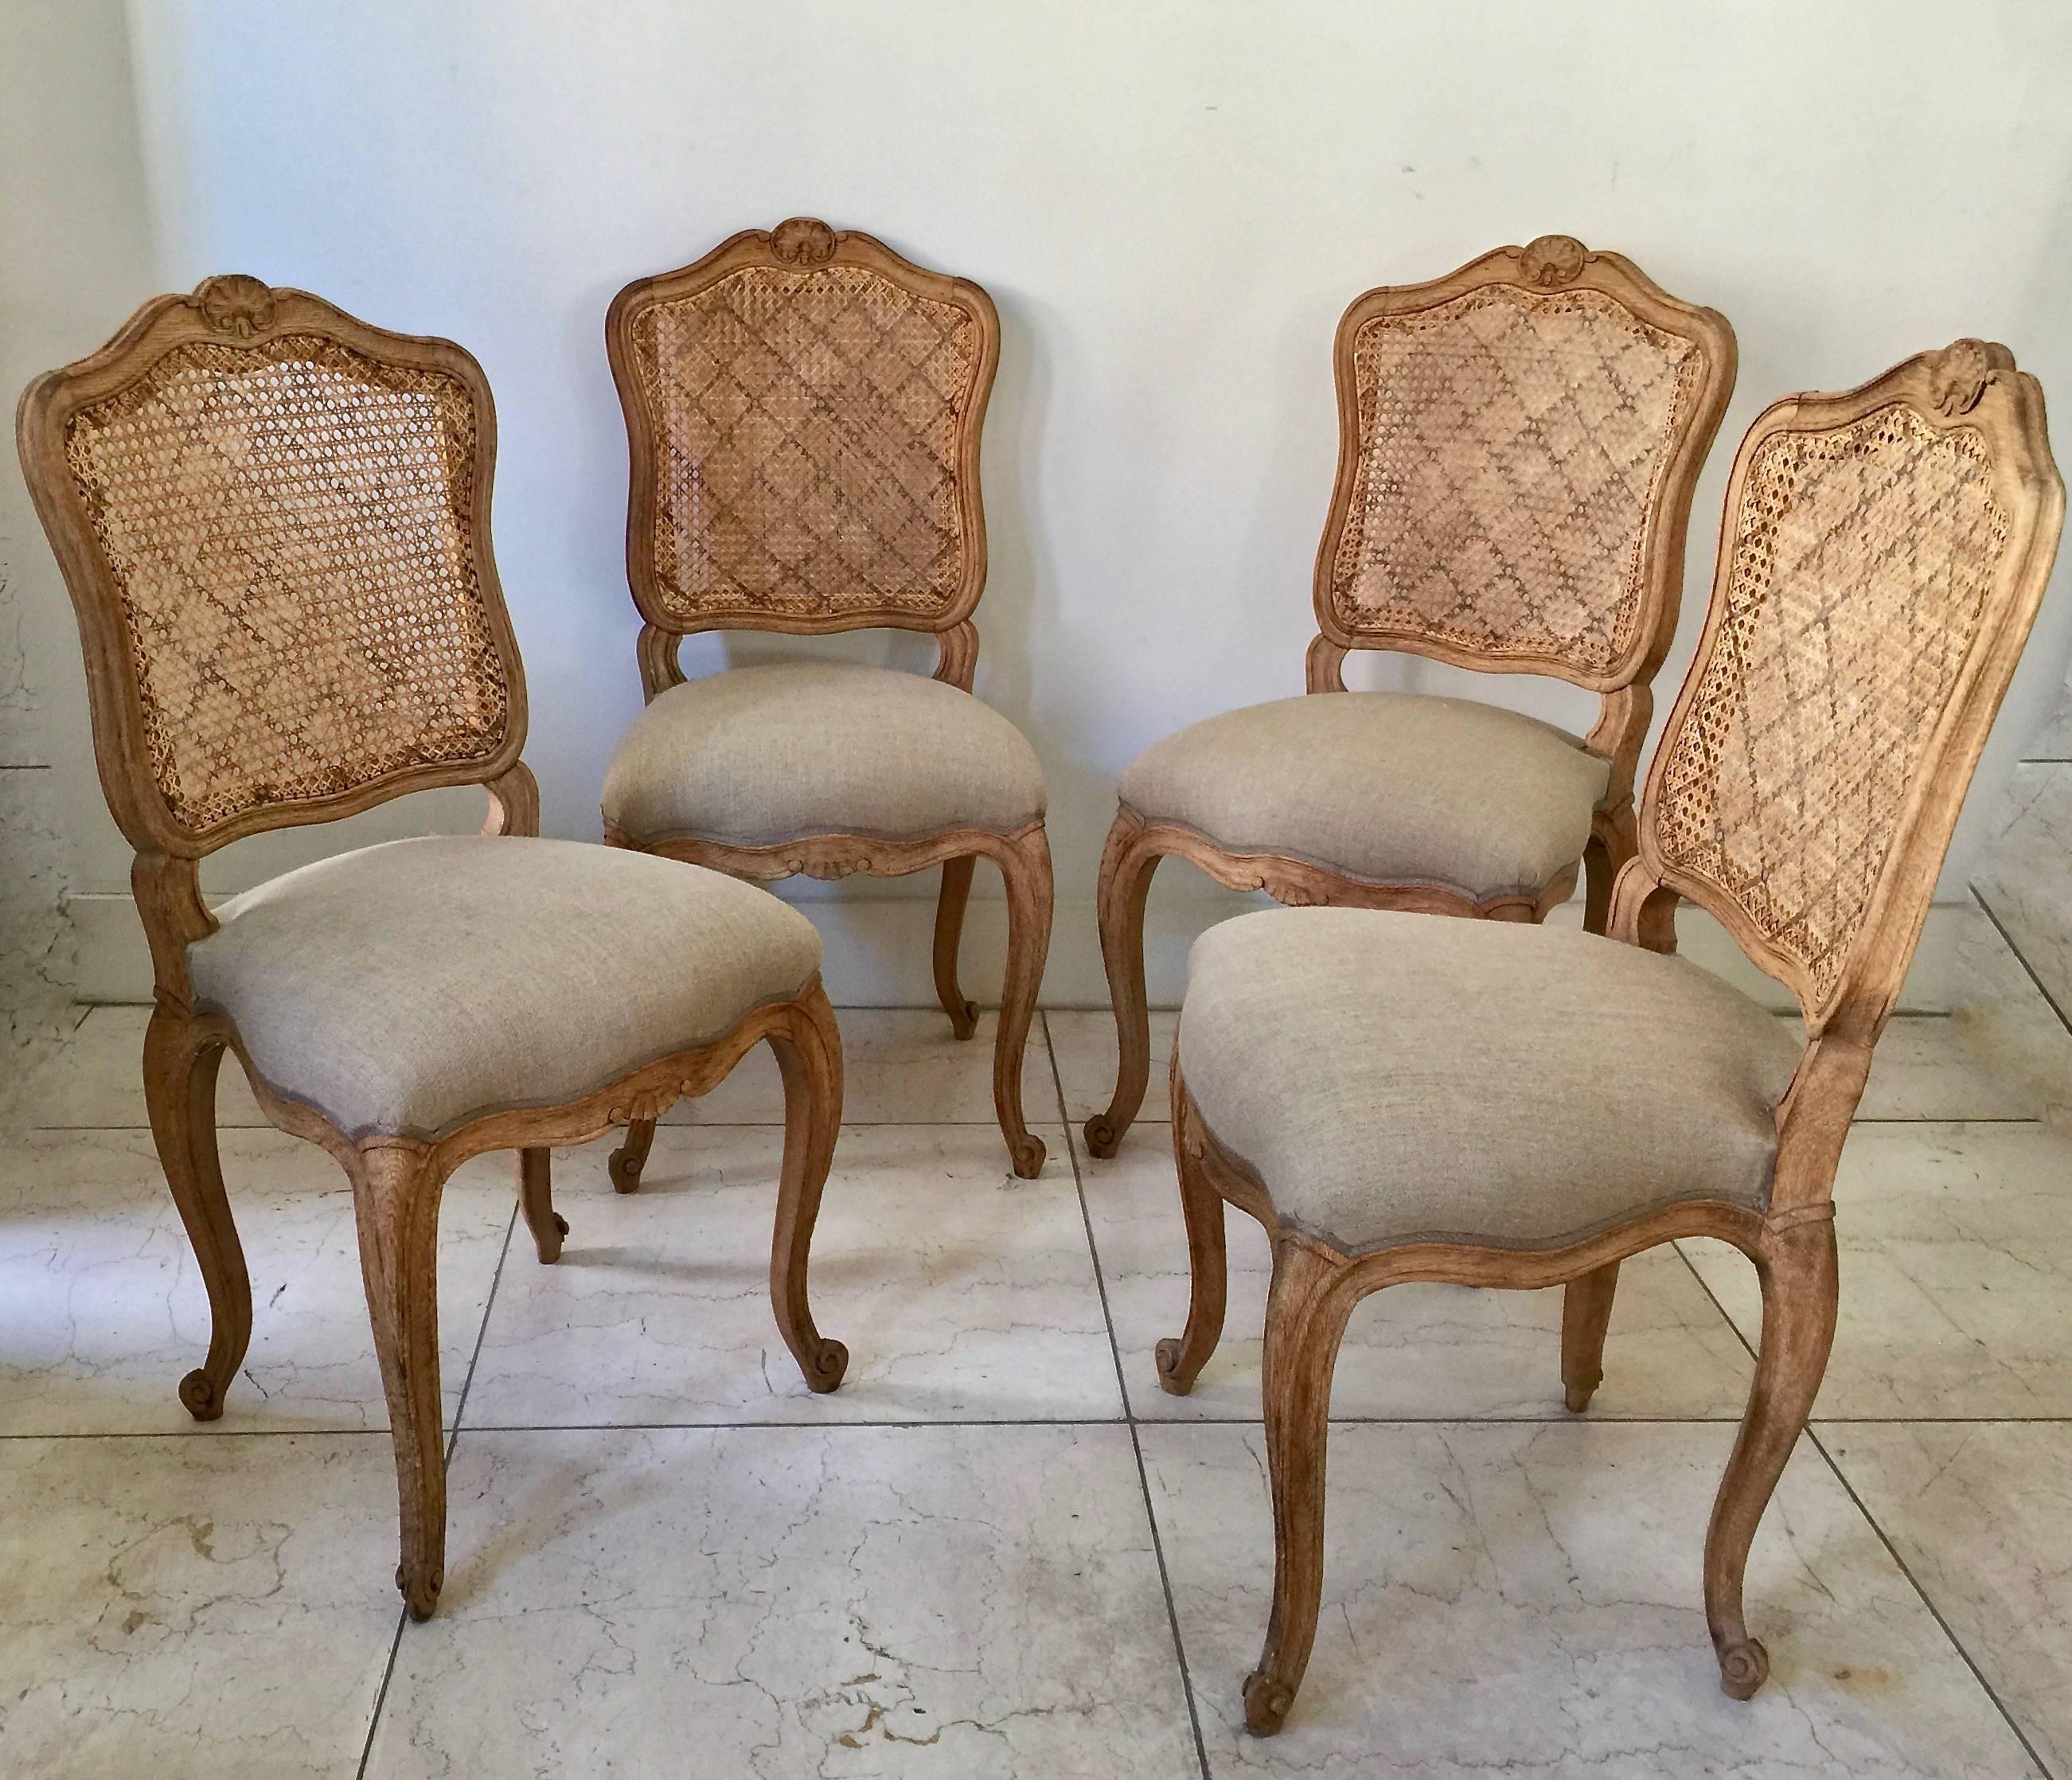 Set of four in natural oak French chairs Louis XV style with flat back called “la Reine” is caned and scalloped frieze carved and raised on cabriole legs. Upholstered in natural linen with classical decorative gimp trim. Very elegant as well as